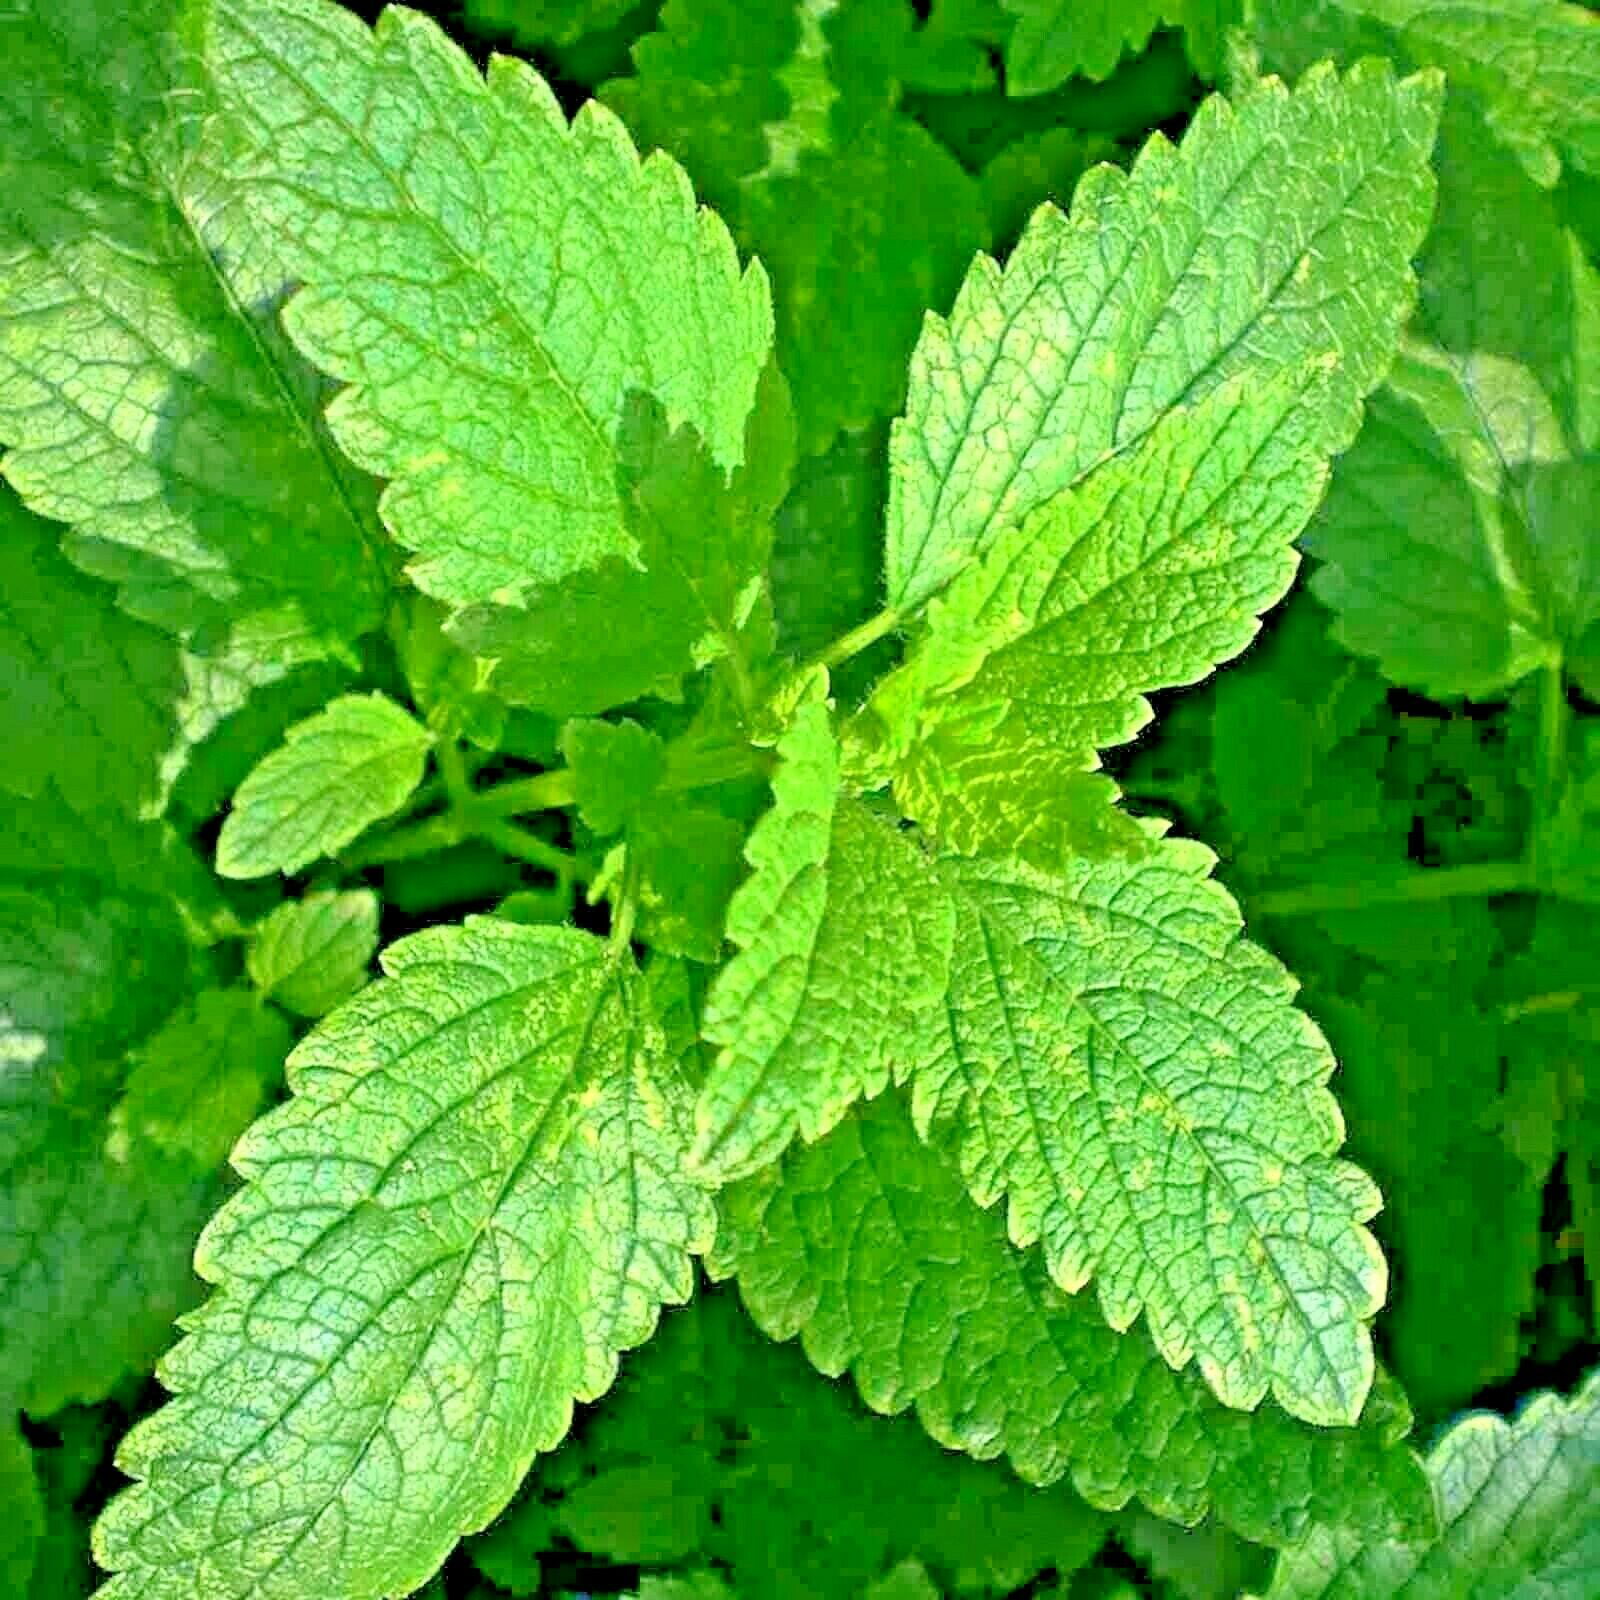 100 Seeds Heirloom Non GMO Mosquito Repellent Details about   Lemon Balm Seeds 